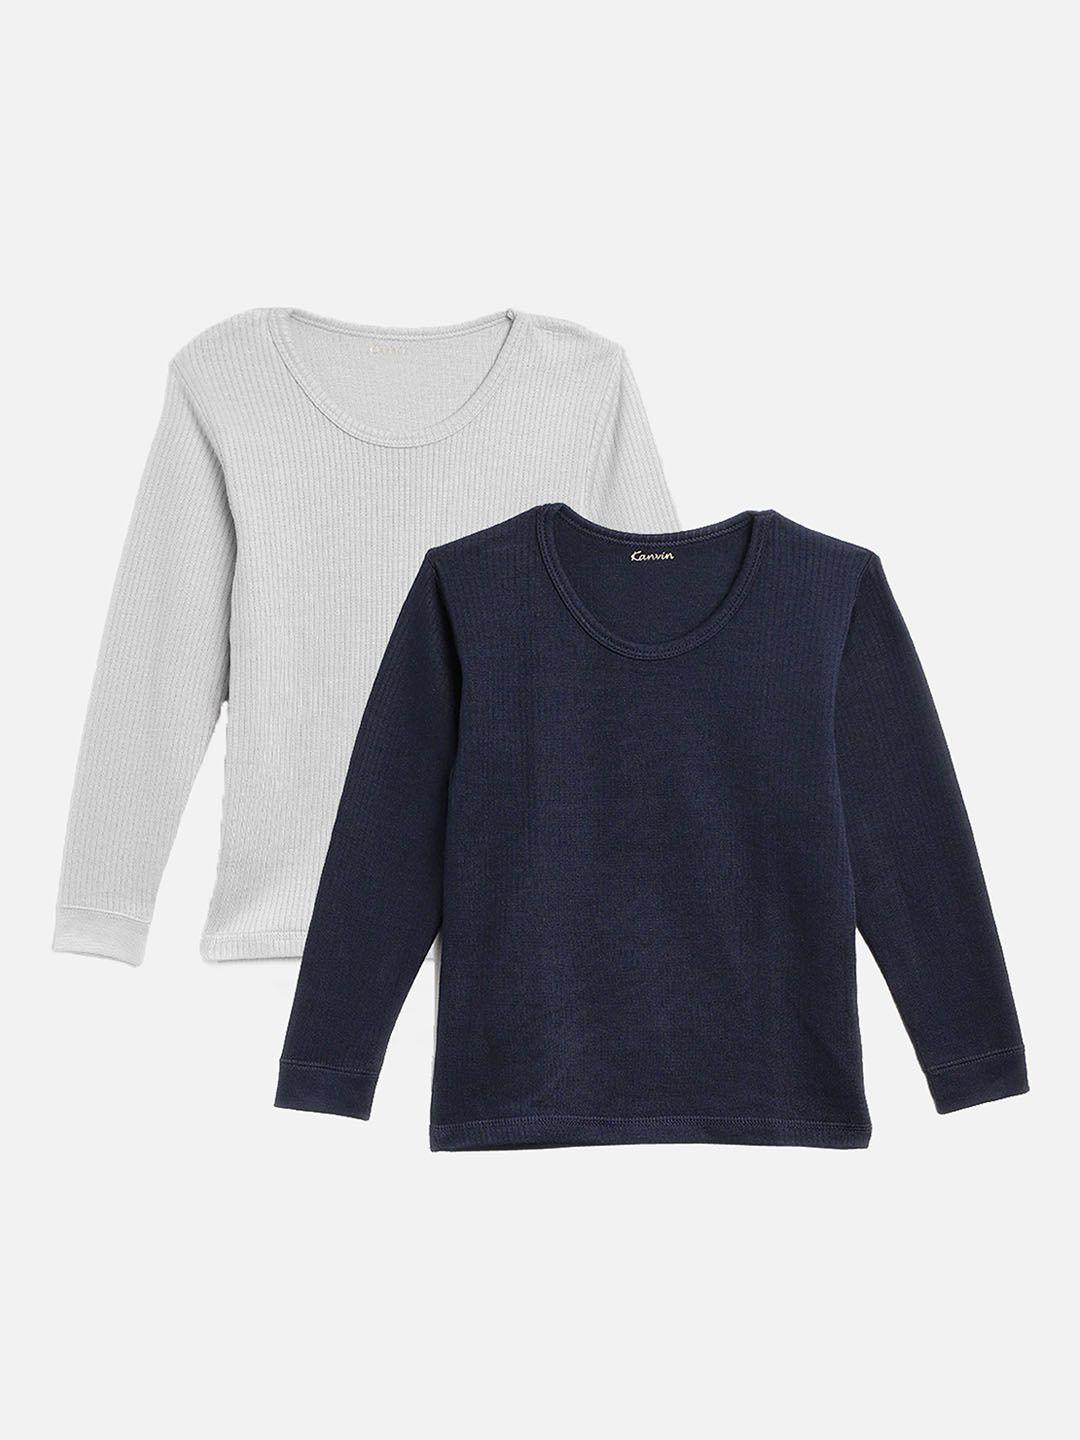 kanvin boys pack of 2 grey & navy blue ribbed cotton thermal tops